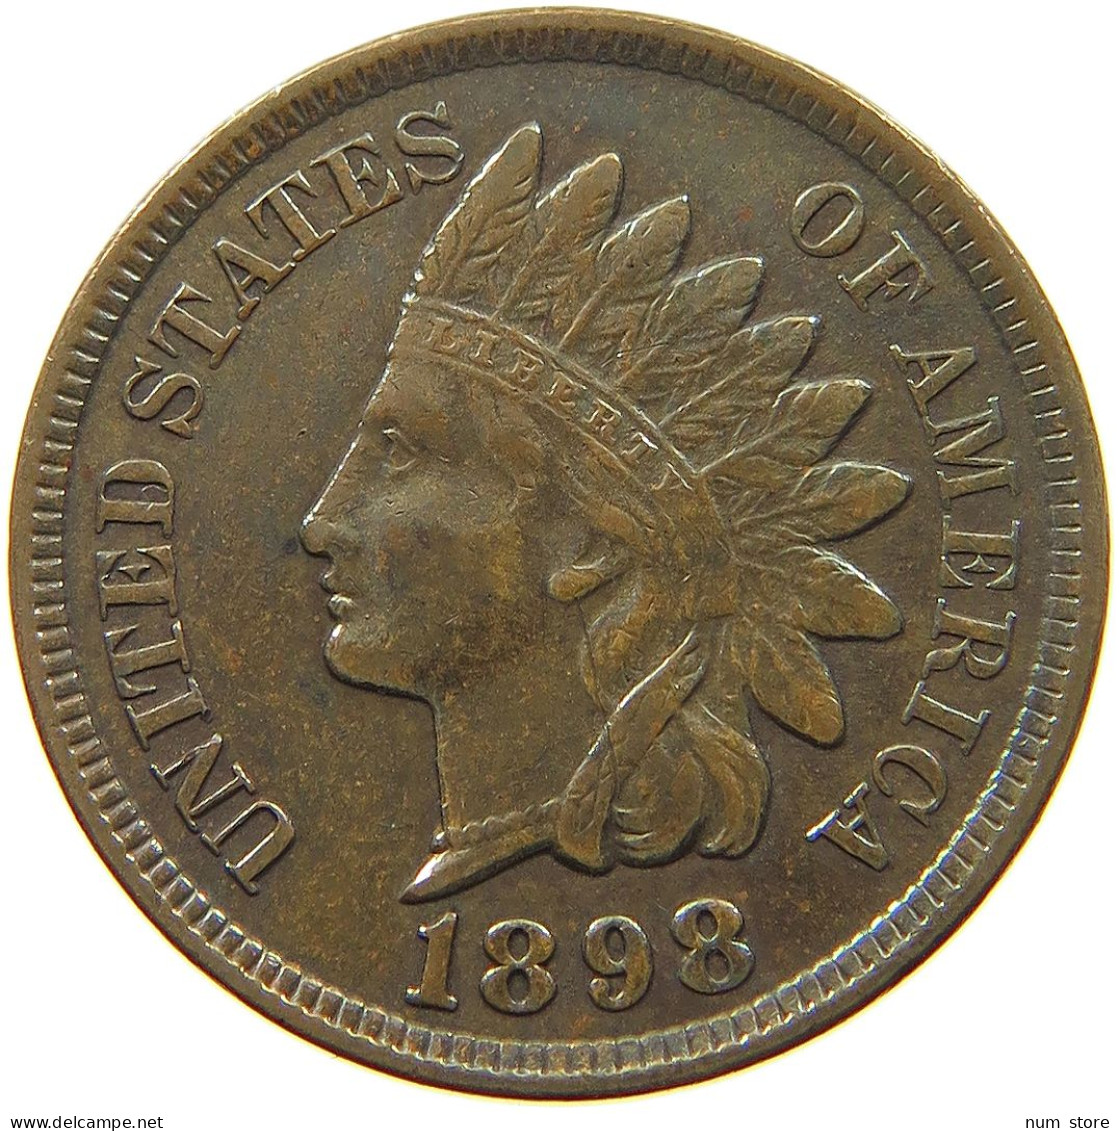 UNITED STATES OF AMERICA CENT 1898 INDIAN HEAD #t115 0059 - 1859-1909: Indian Head